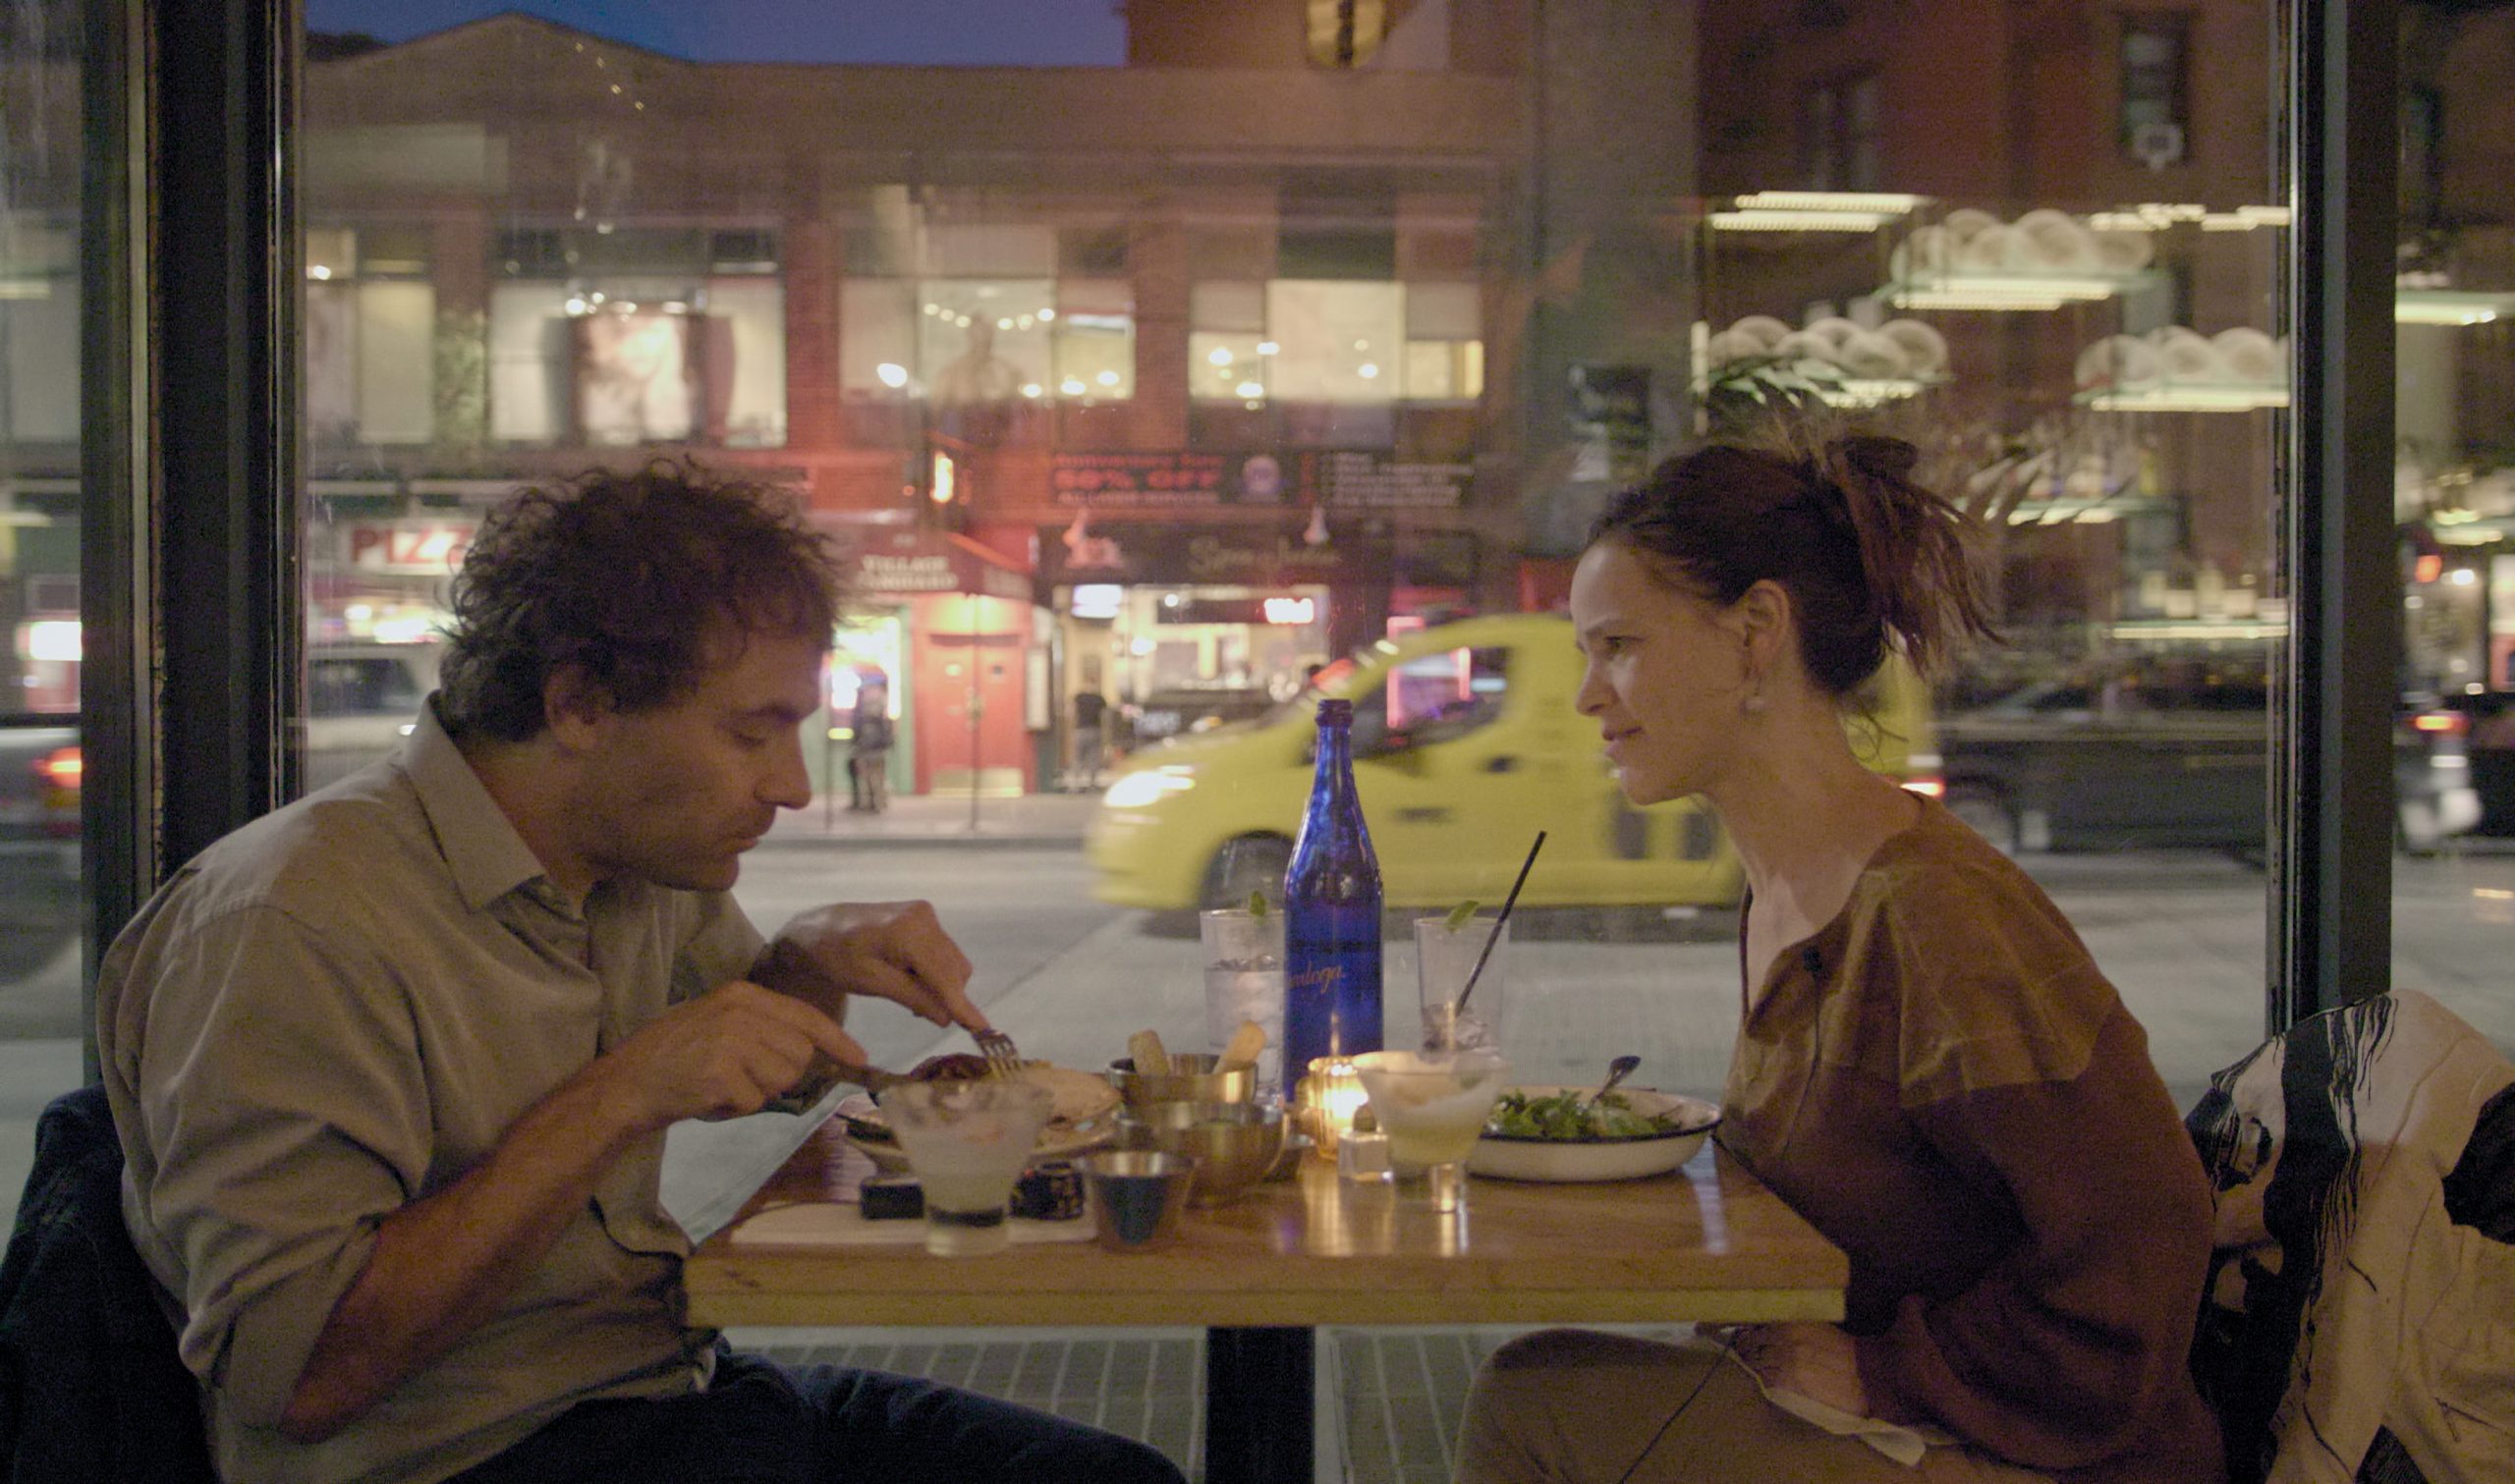 Still from Husband; the couple are eating at a restaurant